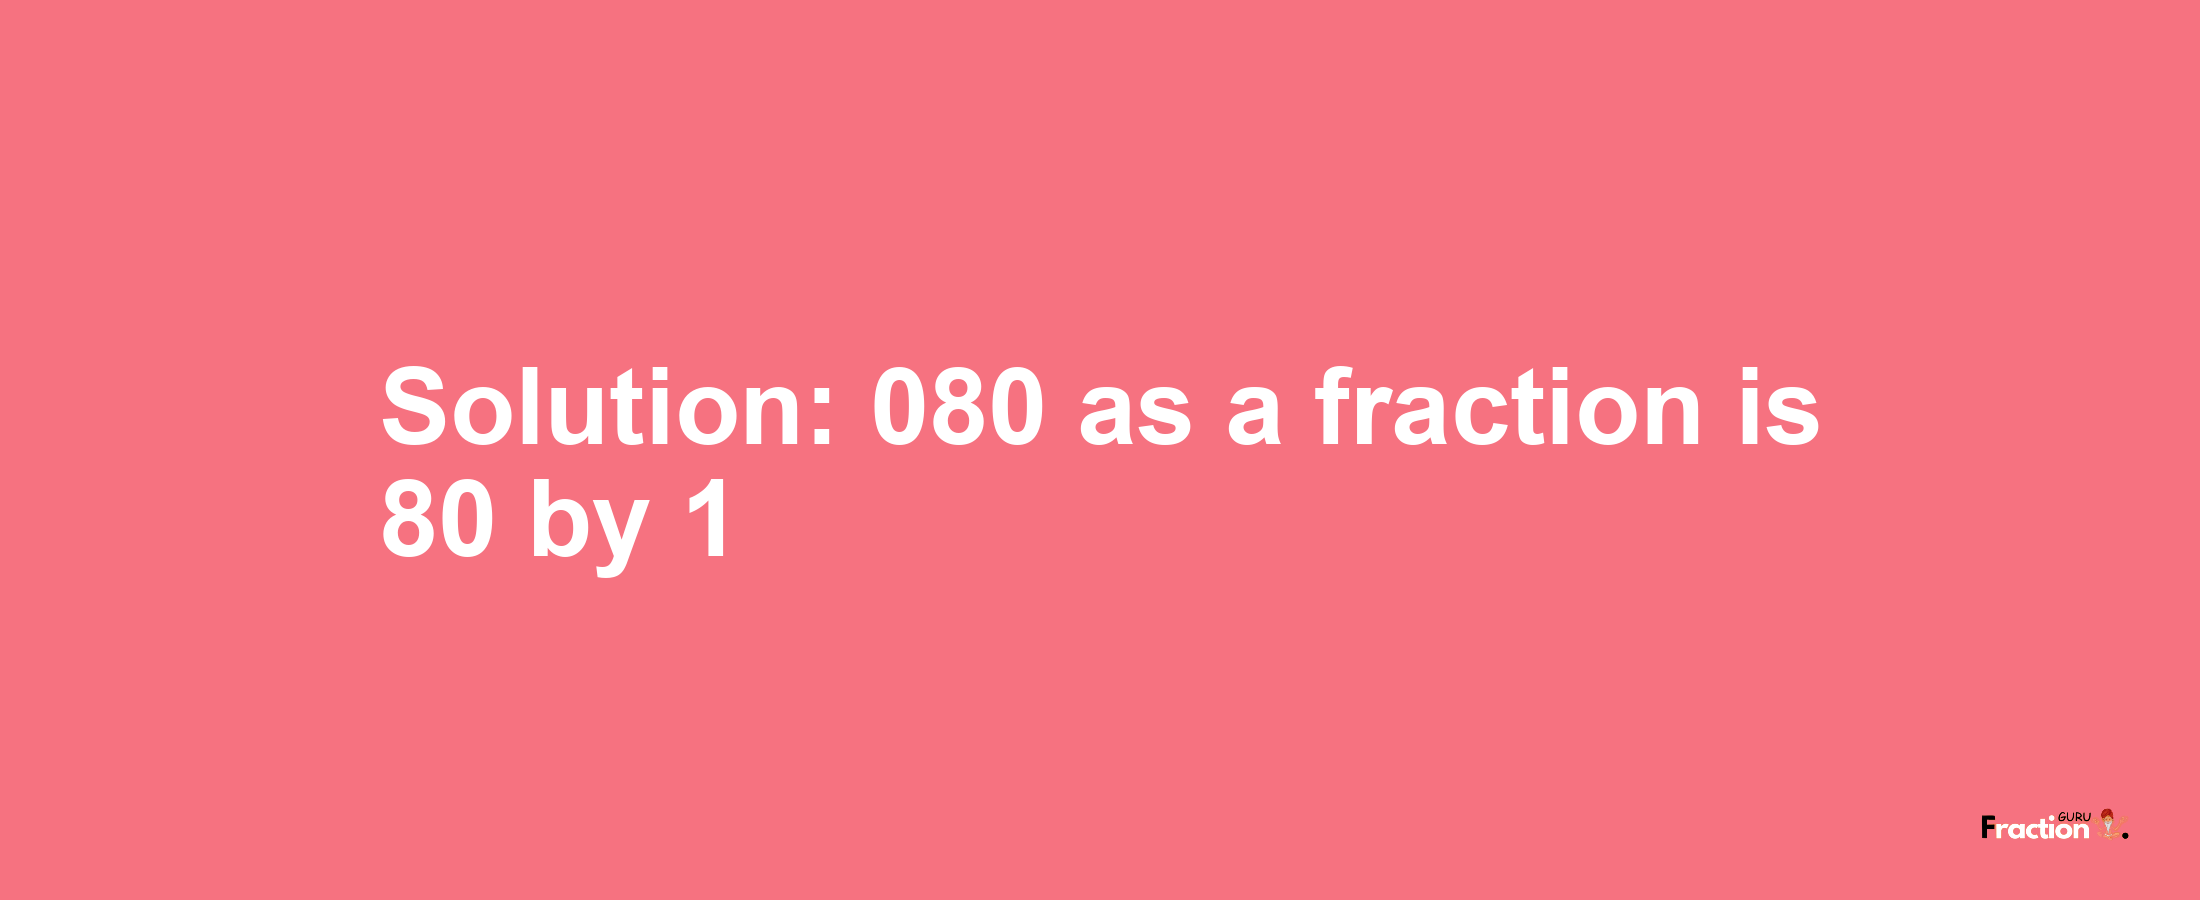 Solution:080 as a fraction is 80/1